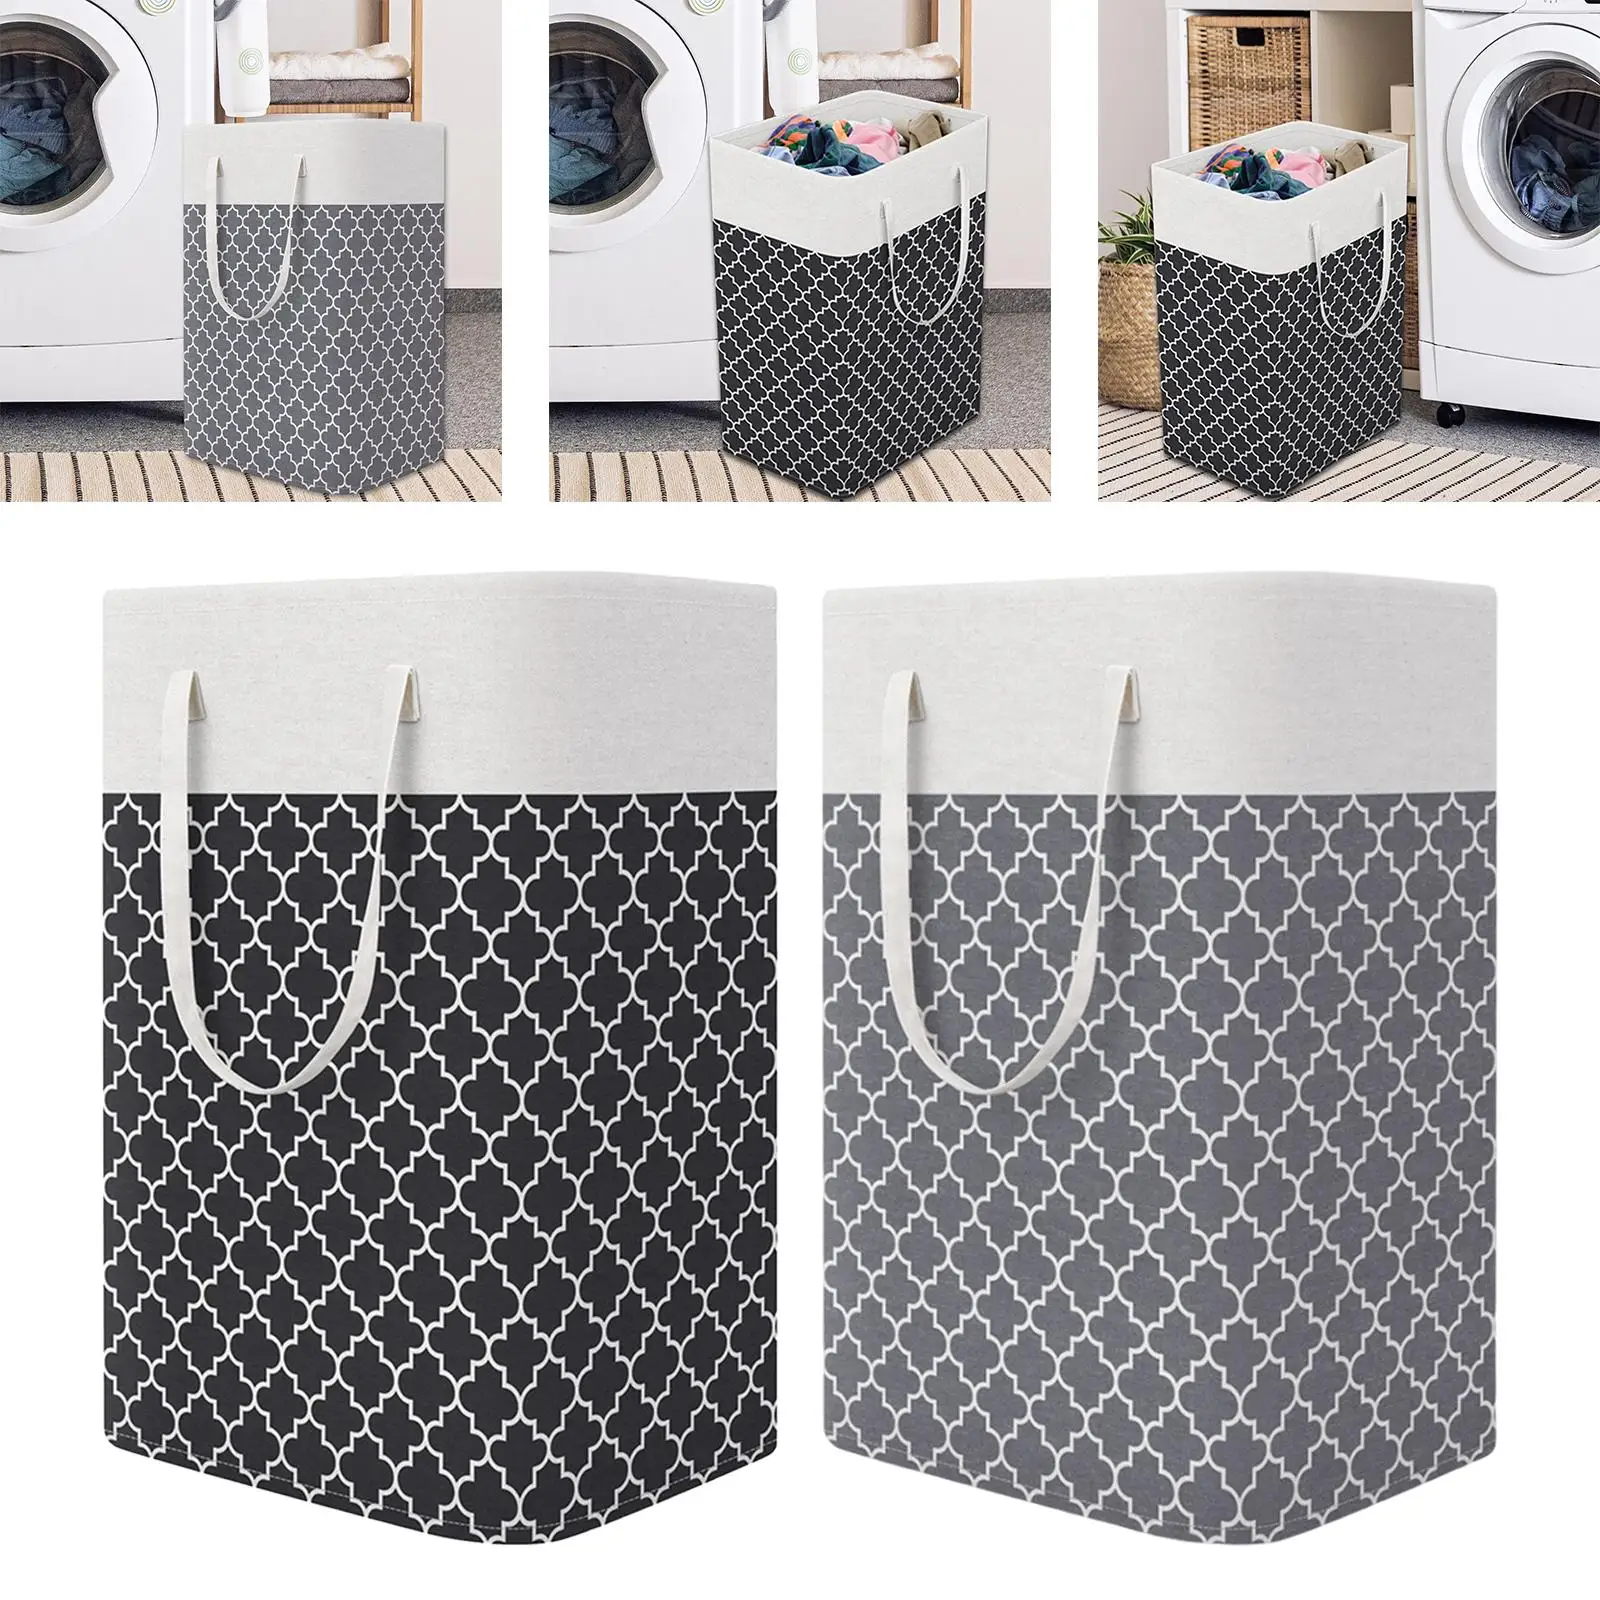 75L Clothes Hamper Foldable Laundry Storage Basket Easily Carry with Handle